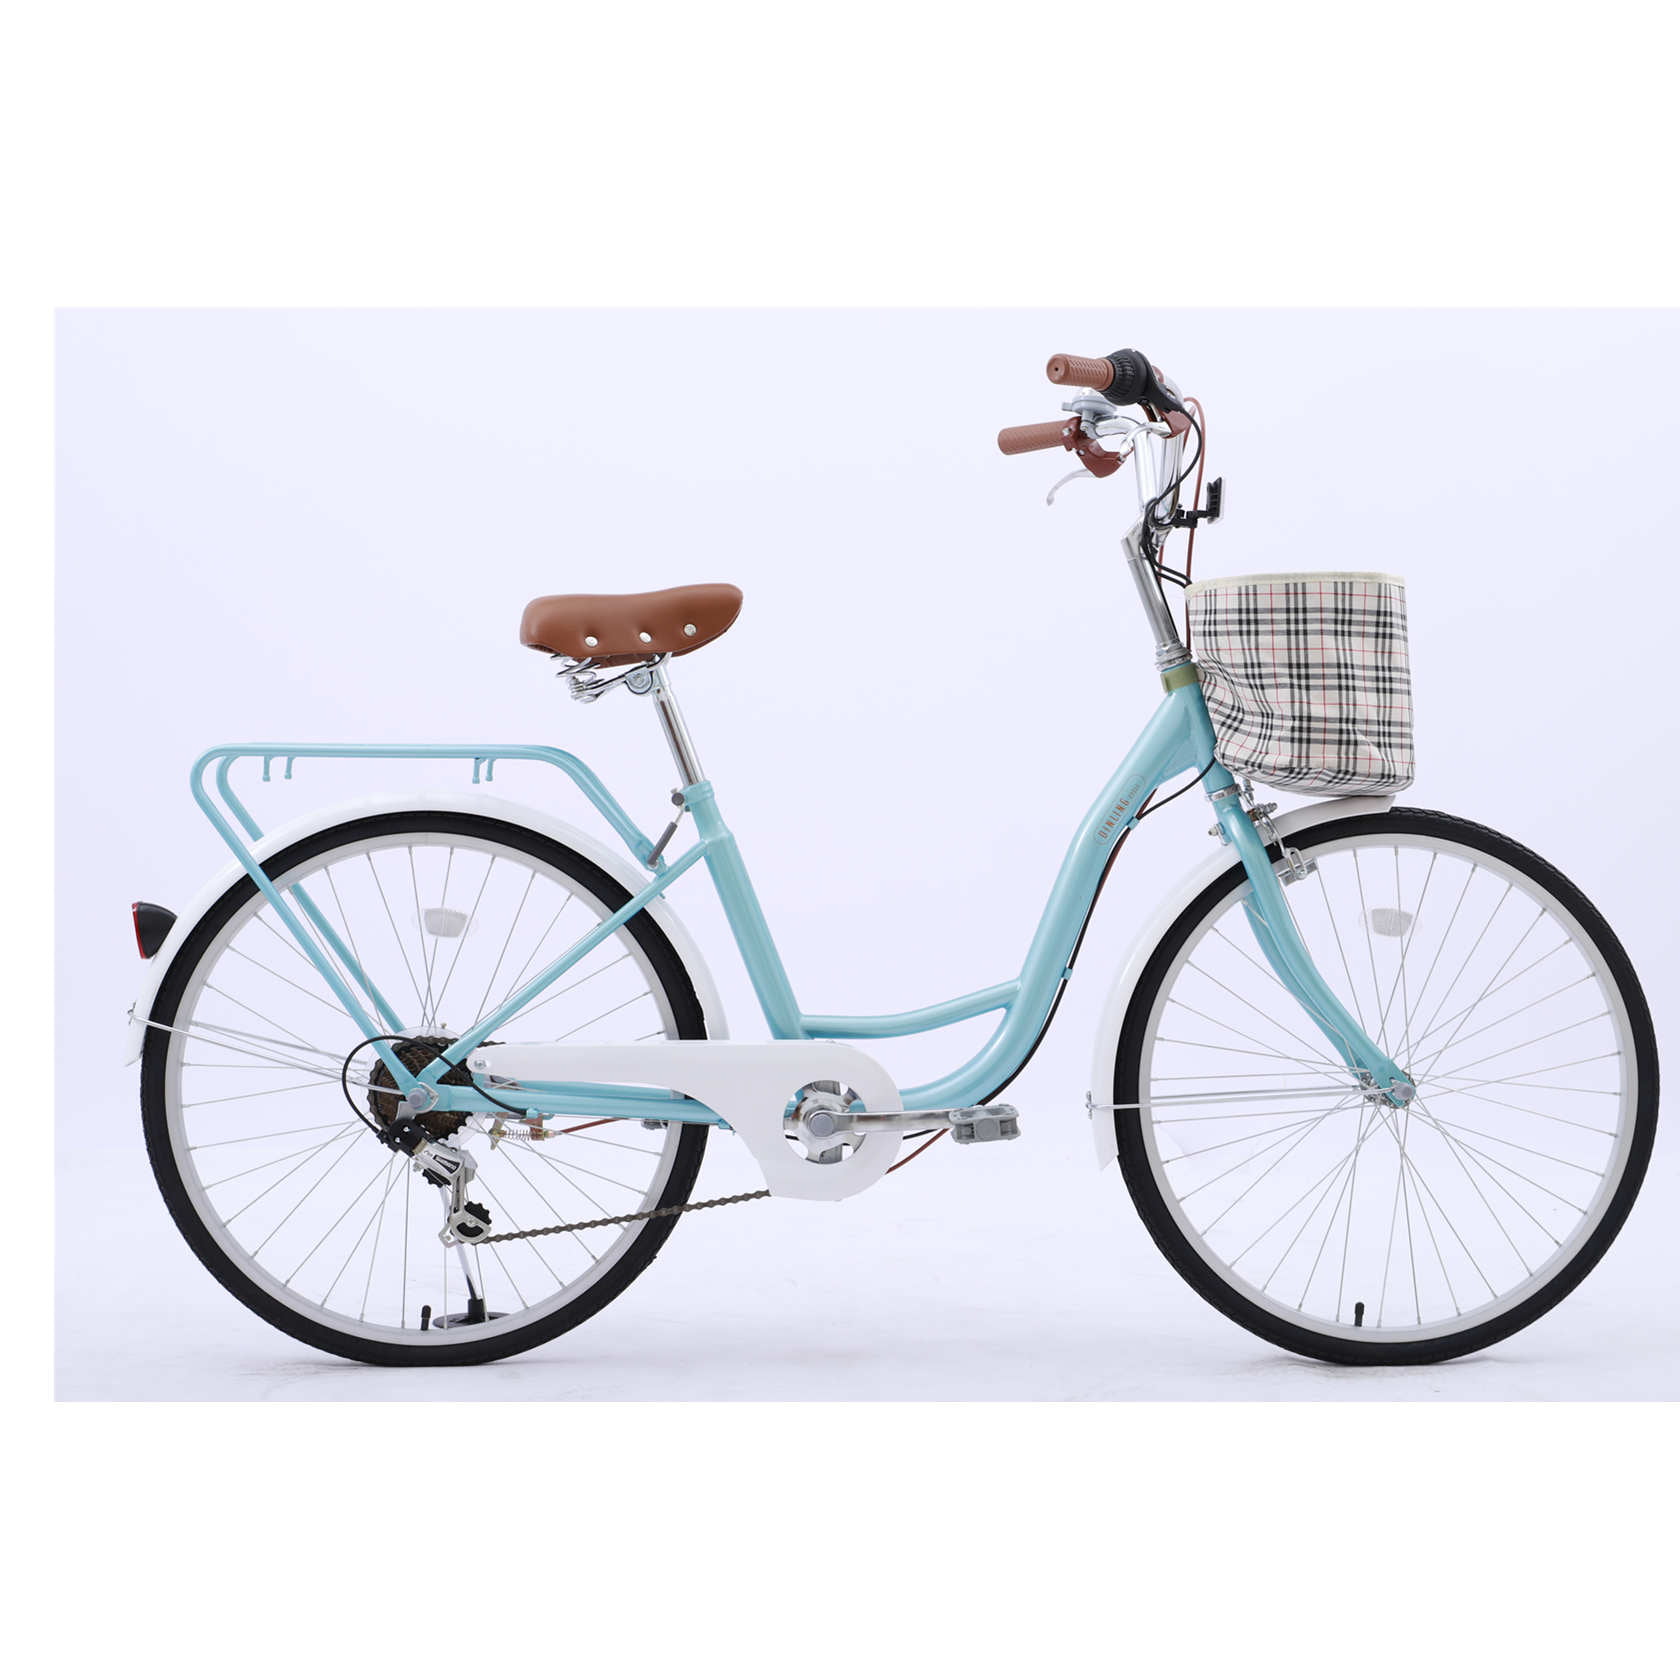 Comfortable Commuter Bicycle for Leisure Picnics & Shopping 26 Inch Comfort Beach Bike for Women Complete Cruiser Bikes Classic Retro Bicycler with Baskets & Rear Racks 